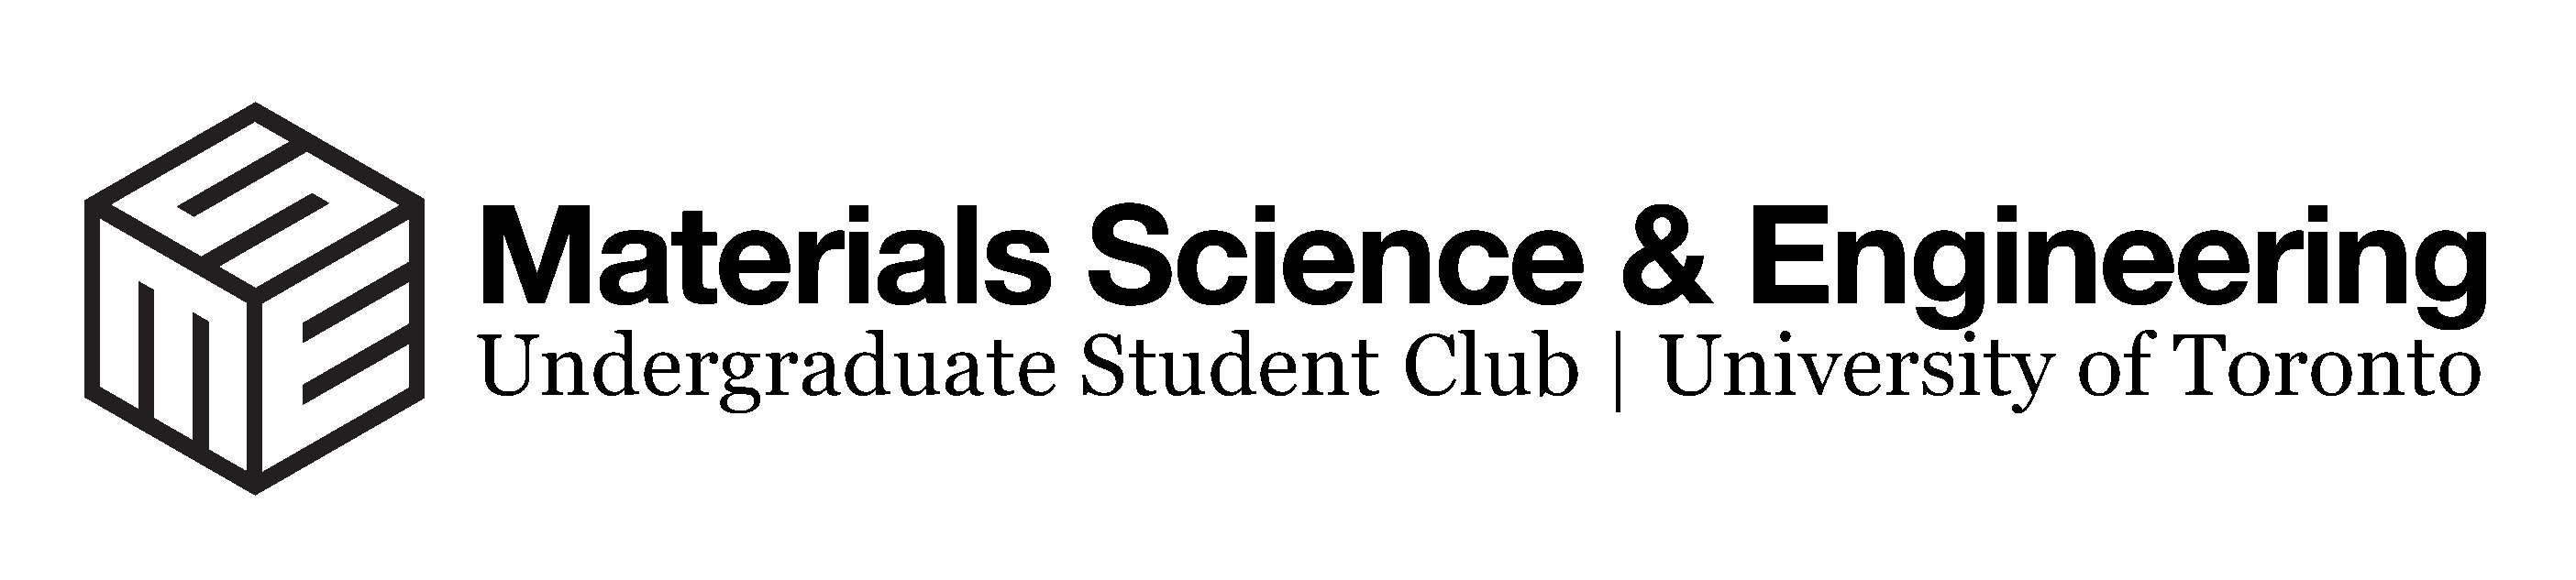 The MSE Club logo